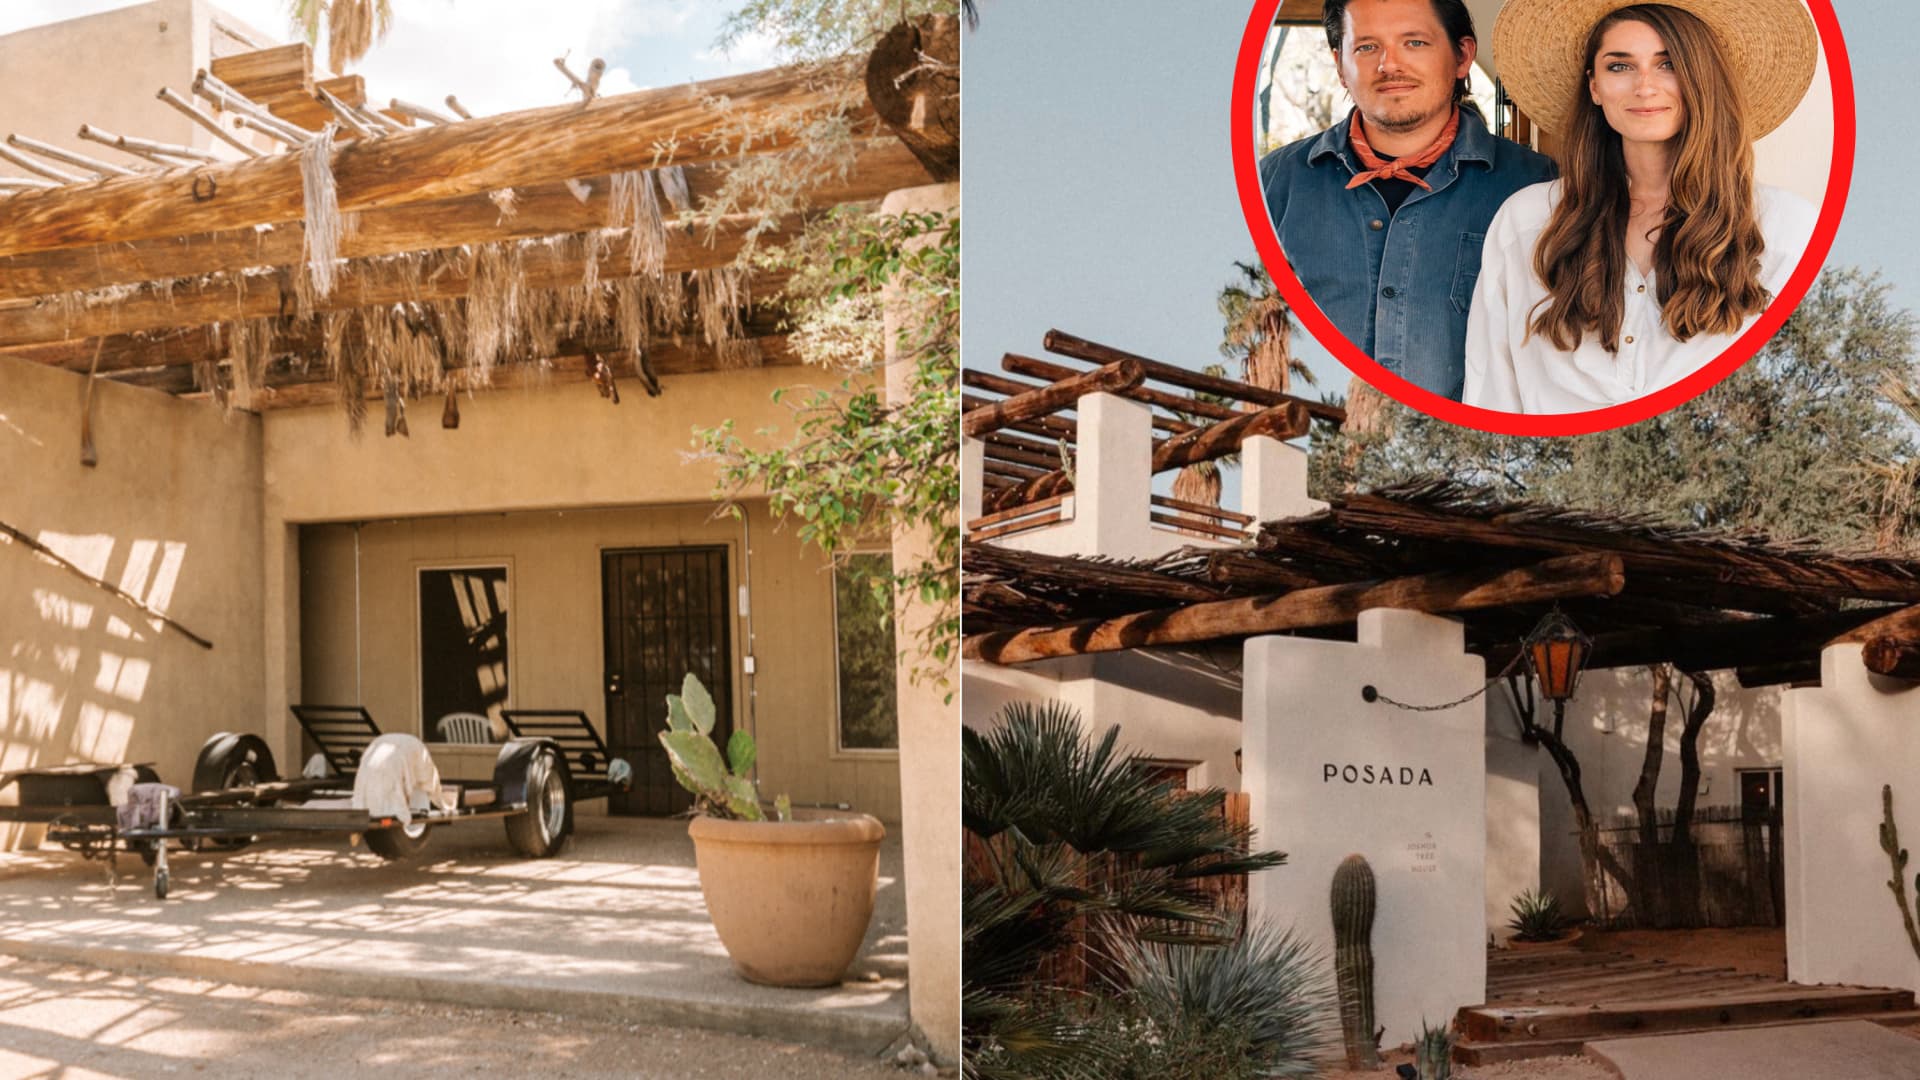 This couple sold an abandoned inn come Saguaro Nationwide Park for $615,000 and grew to turn into it into a wilderness oasis